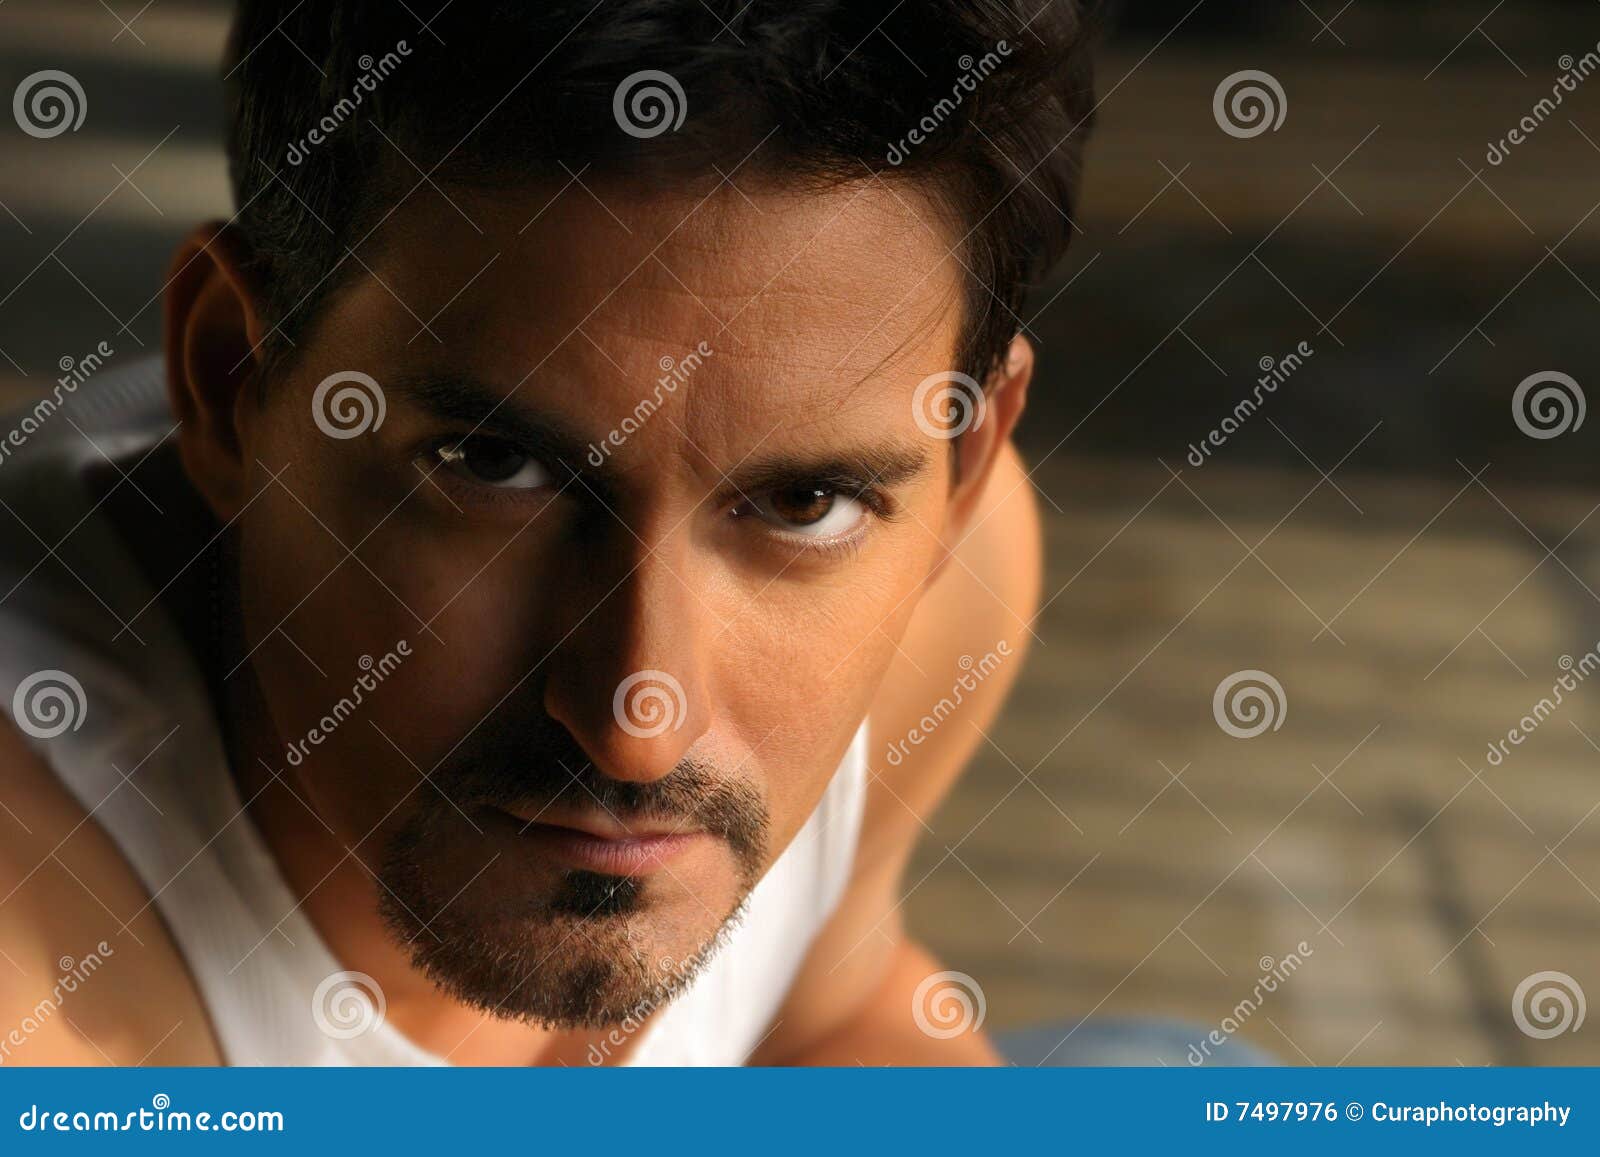 Menacing person Cut Out Stock Images & Pictures - Alamy